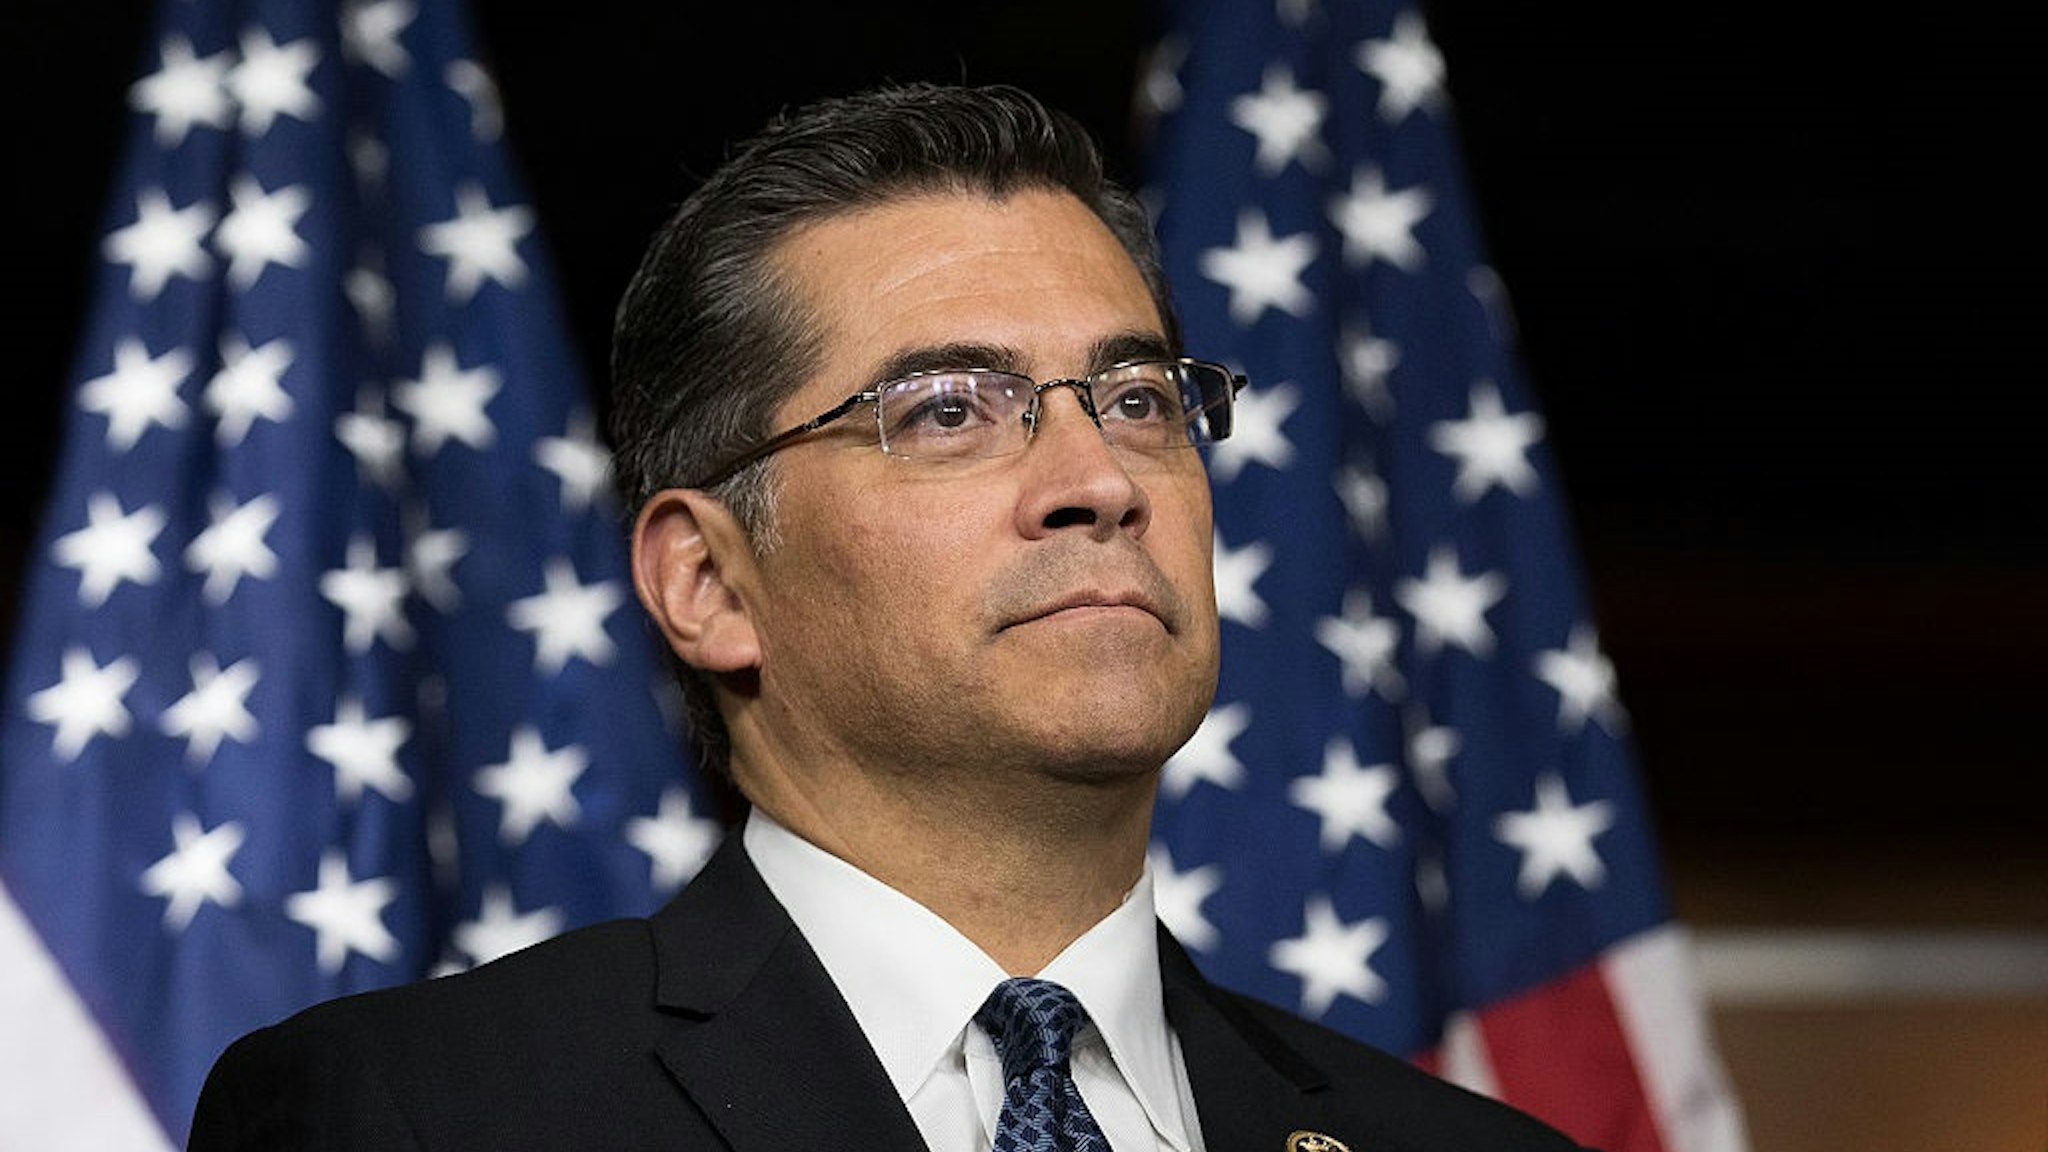 WASHINGTON, DC - MAY 11: Rep. Xavier Becerra (D-CA) listens during a news conference to discuss the rhetoric of presidential candidate Donald Trump, at the U.S. Capitol, May 11, 2016, in Washington, DC.